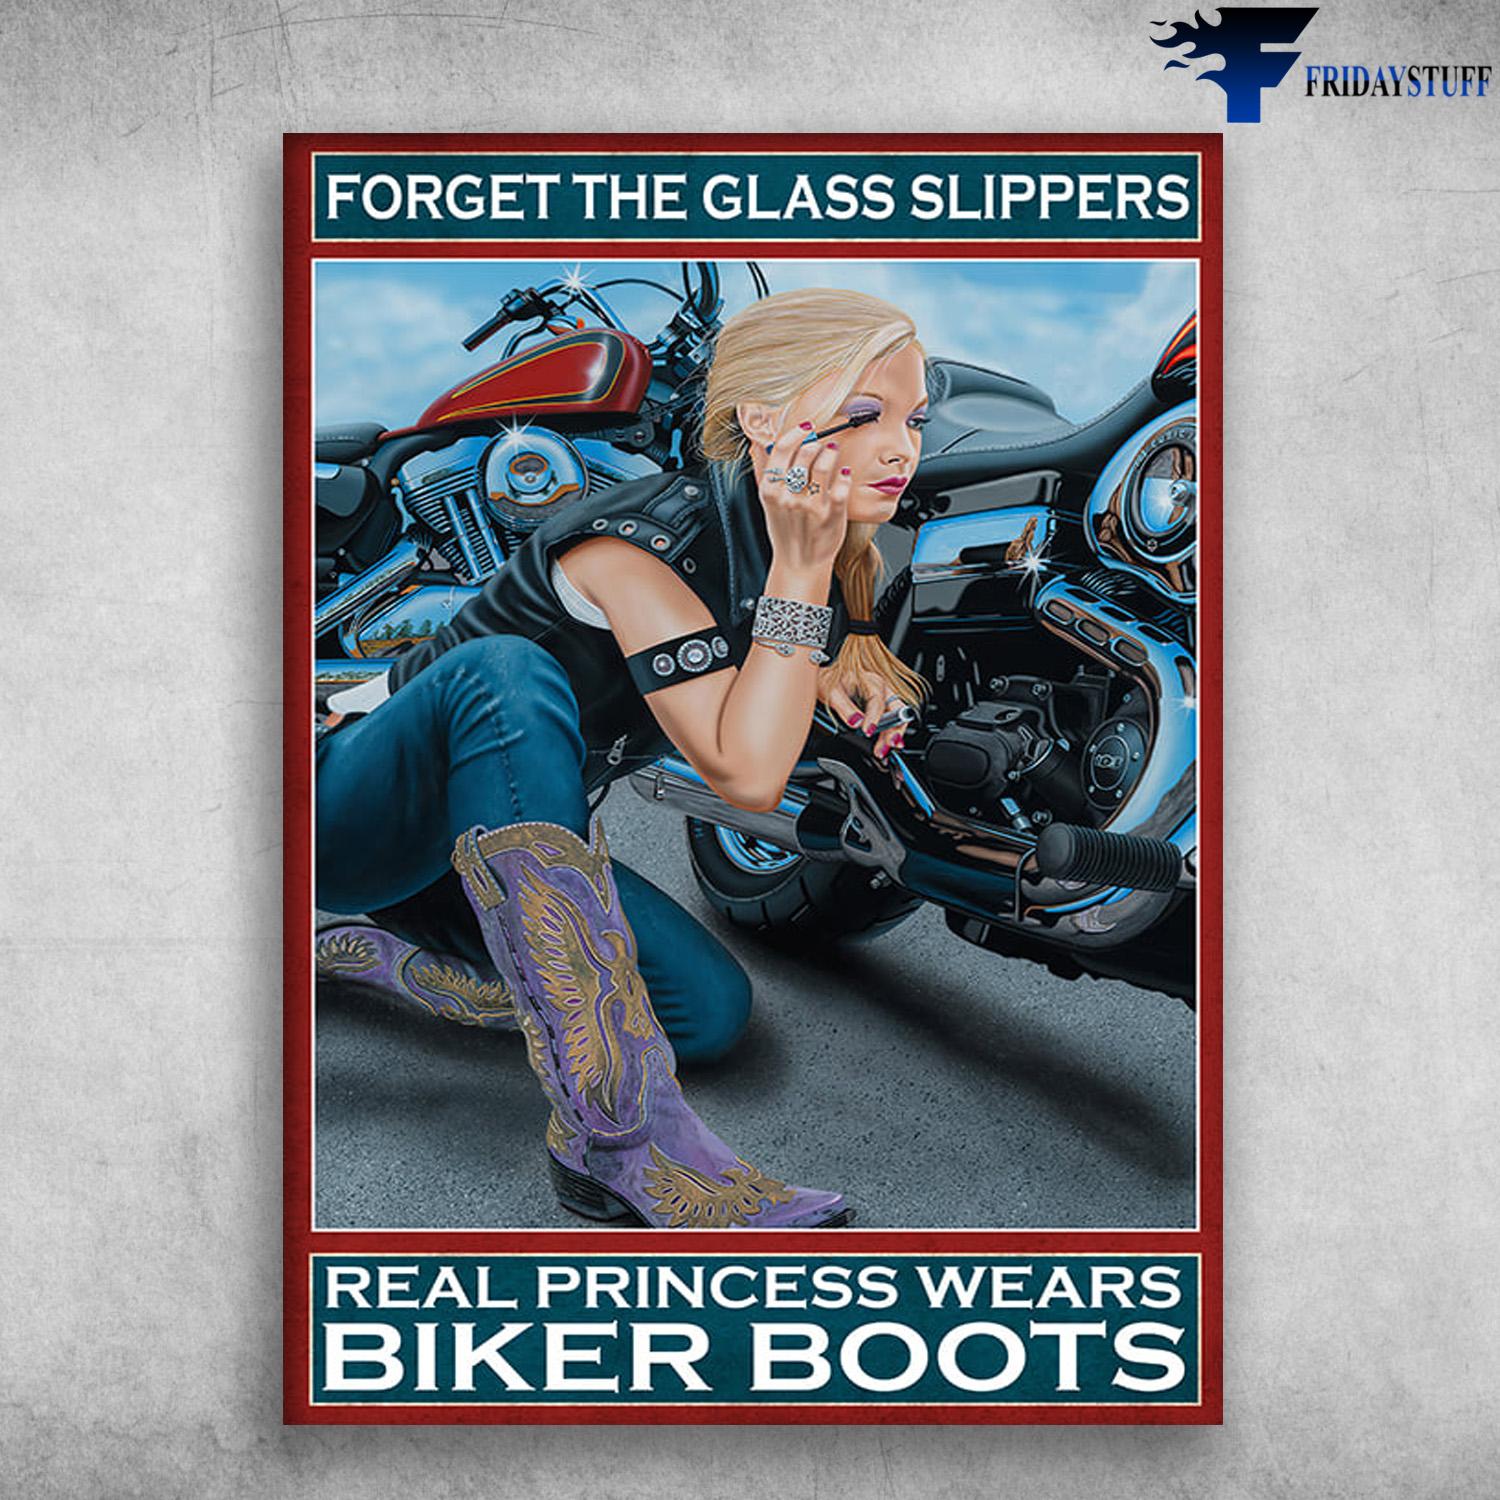 Motorcycle Lover, Female Biker, Forget The Glass Slippers, Real Princess Wears Biker Boots